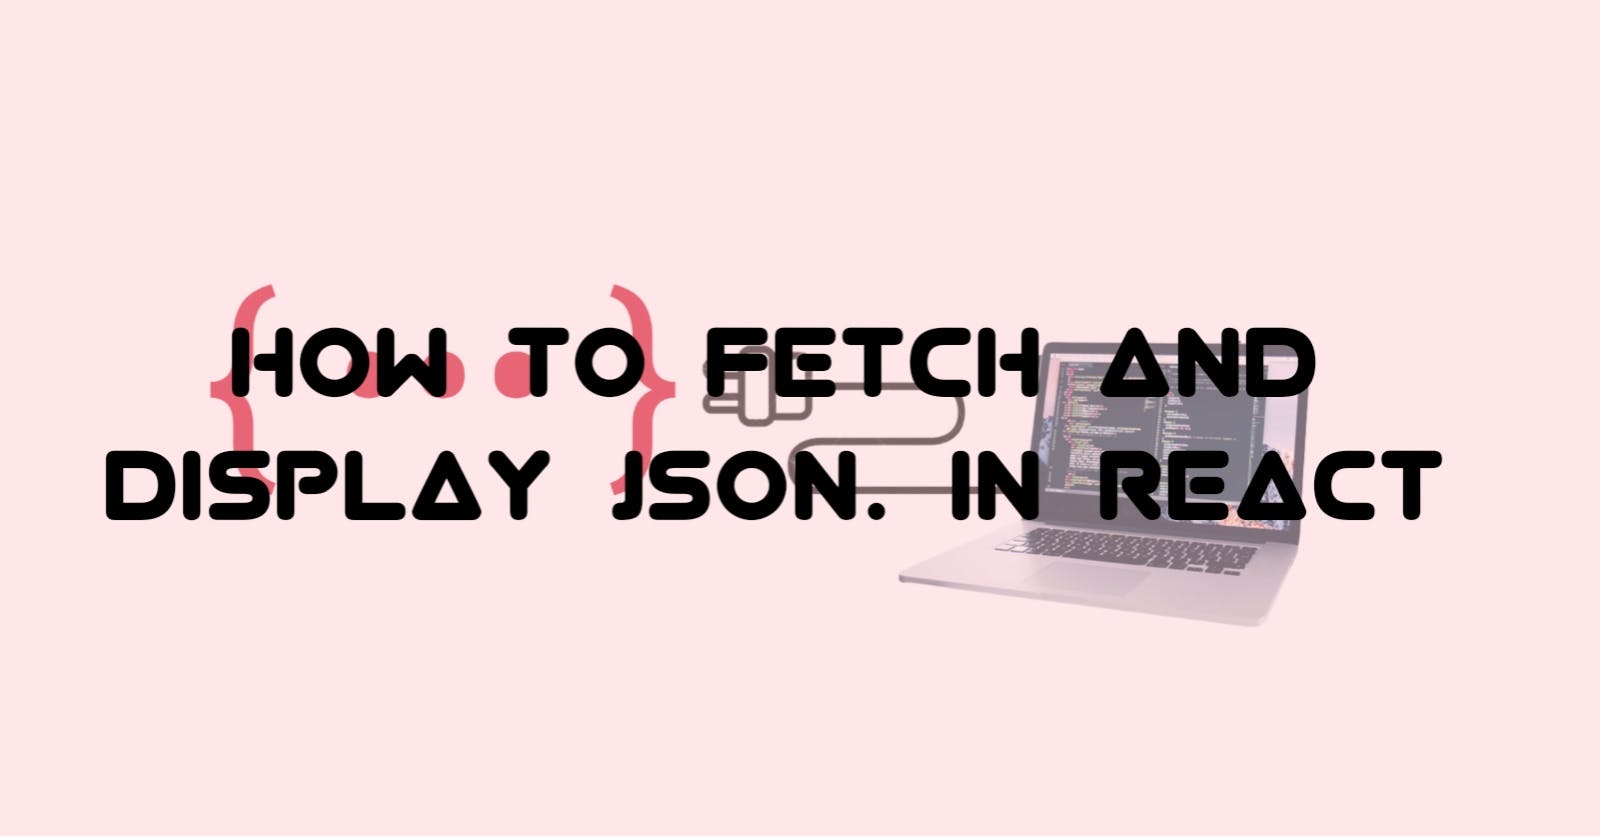 How To Fetch And Display JSON In React